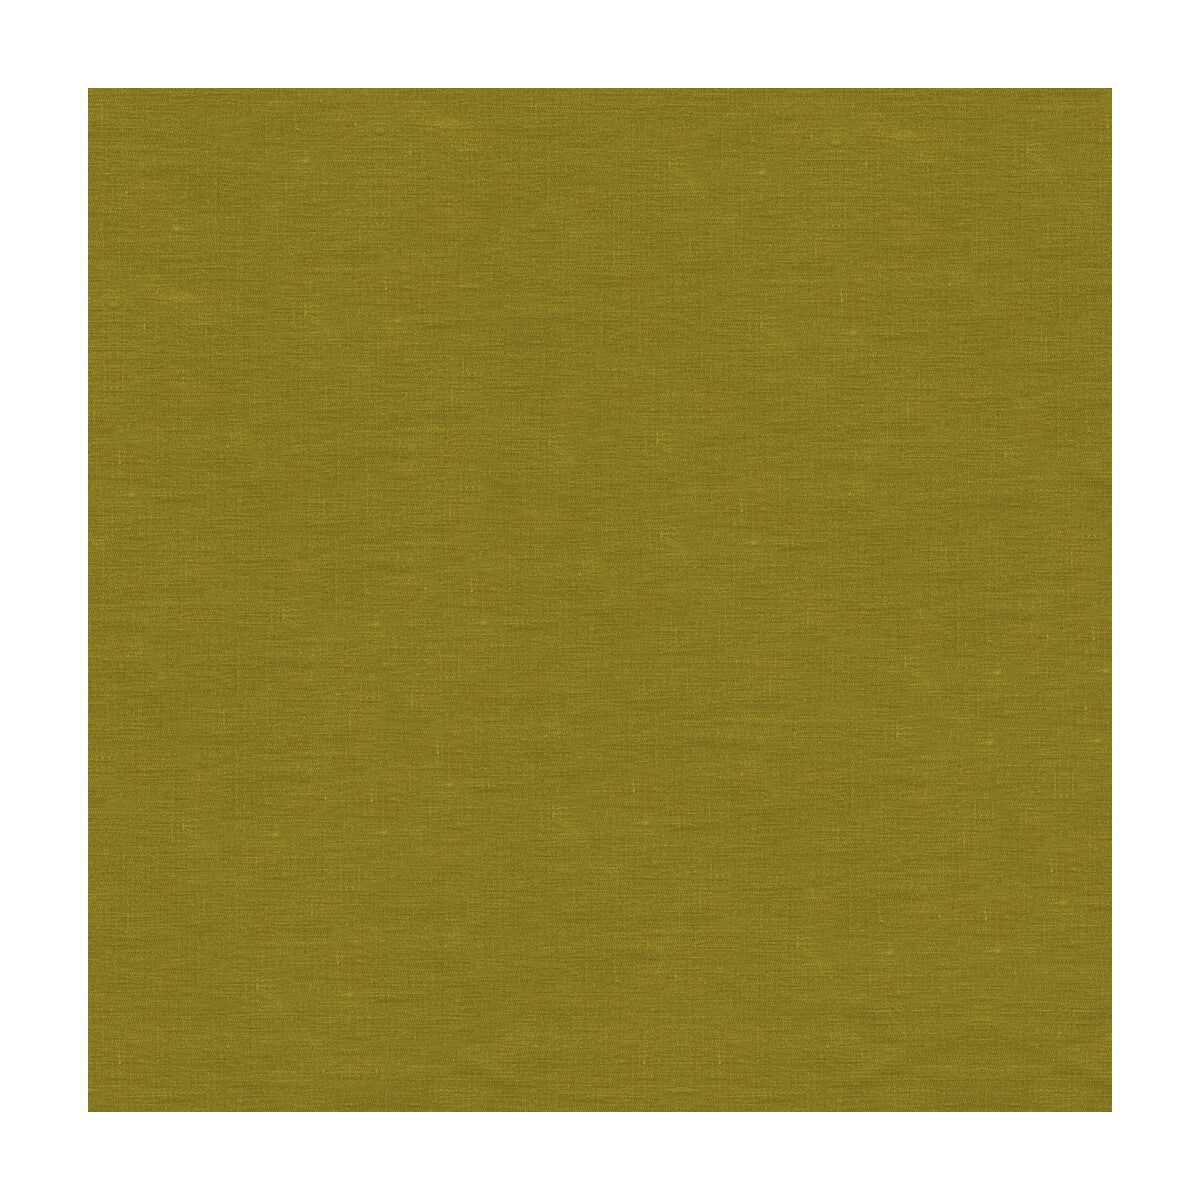 Star Fire fabric in olive color - pattern 33004.23.0 - by Kravet Couture in the Michael Berman II Collection collection